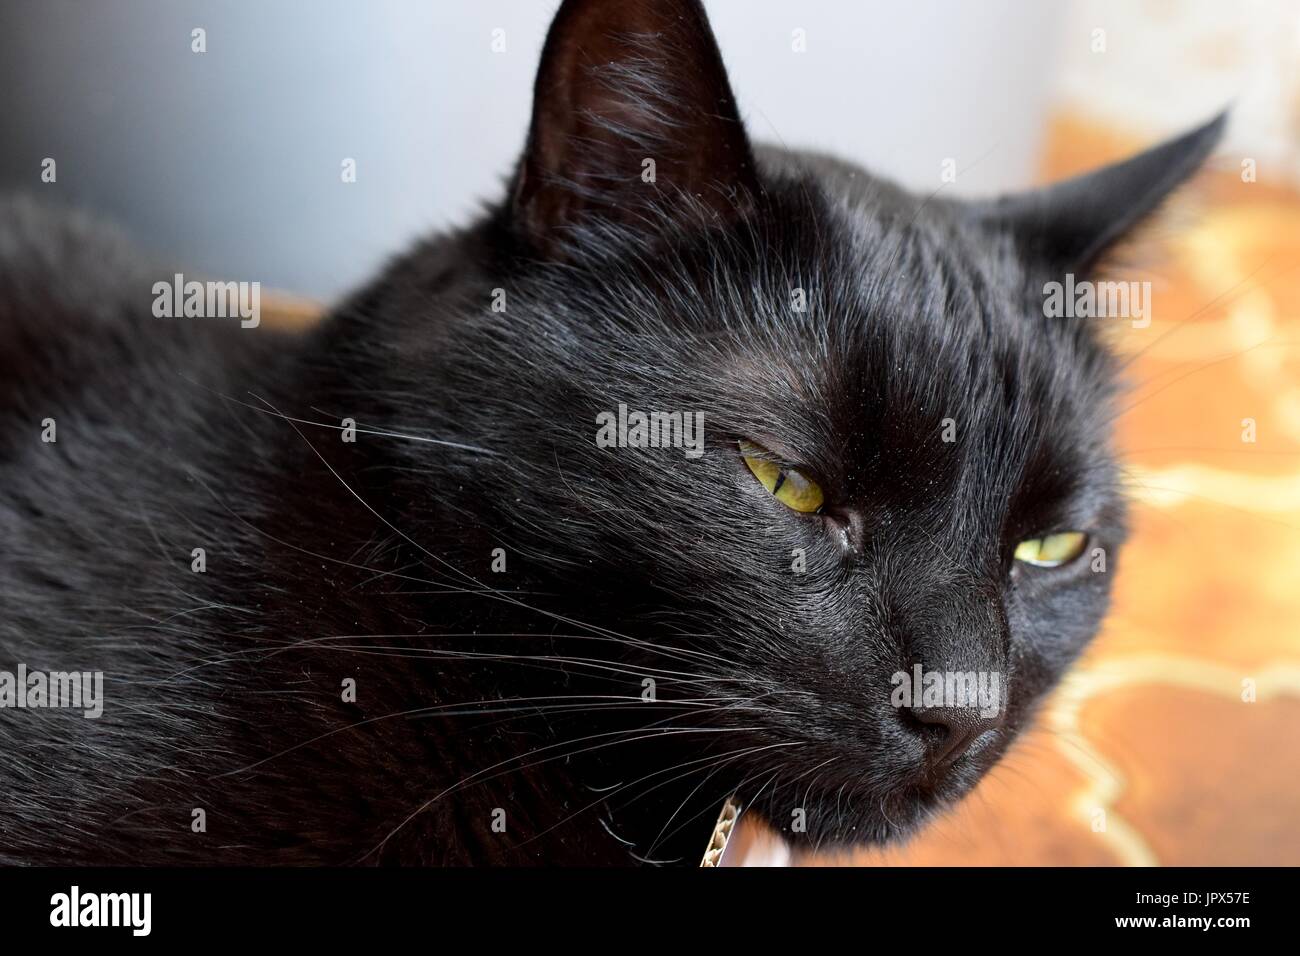 A tired, black domestic short-haired cat resting indoors Stock Photo